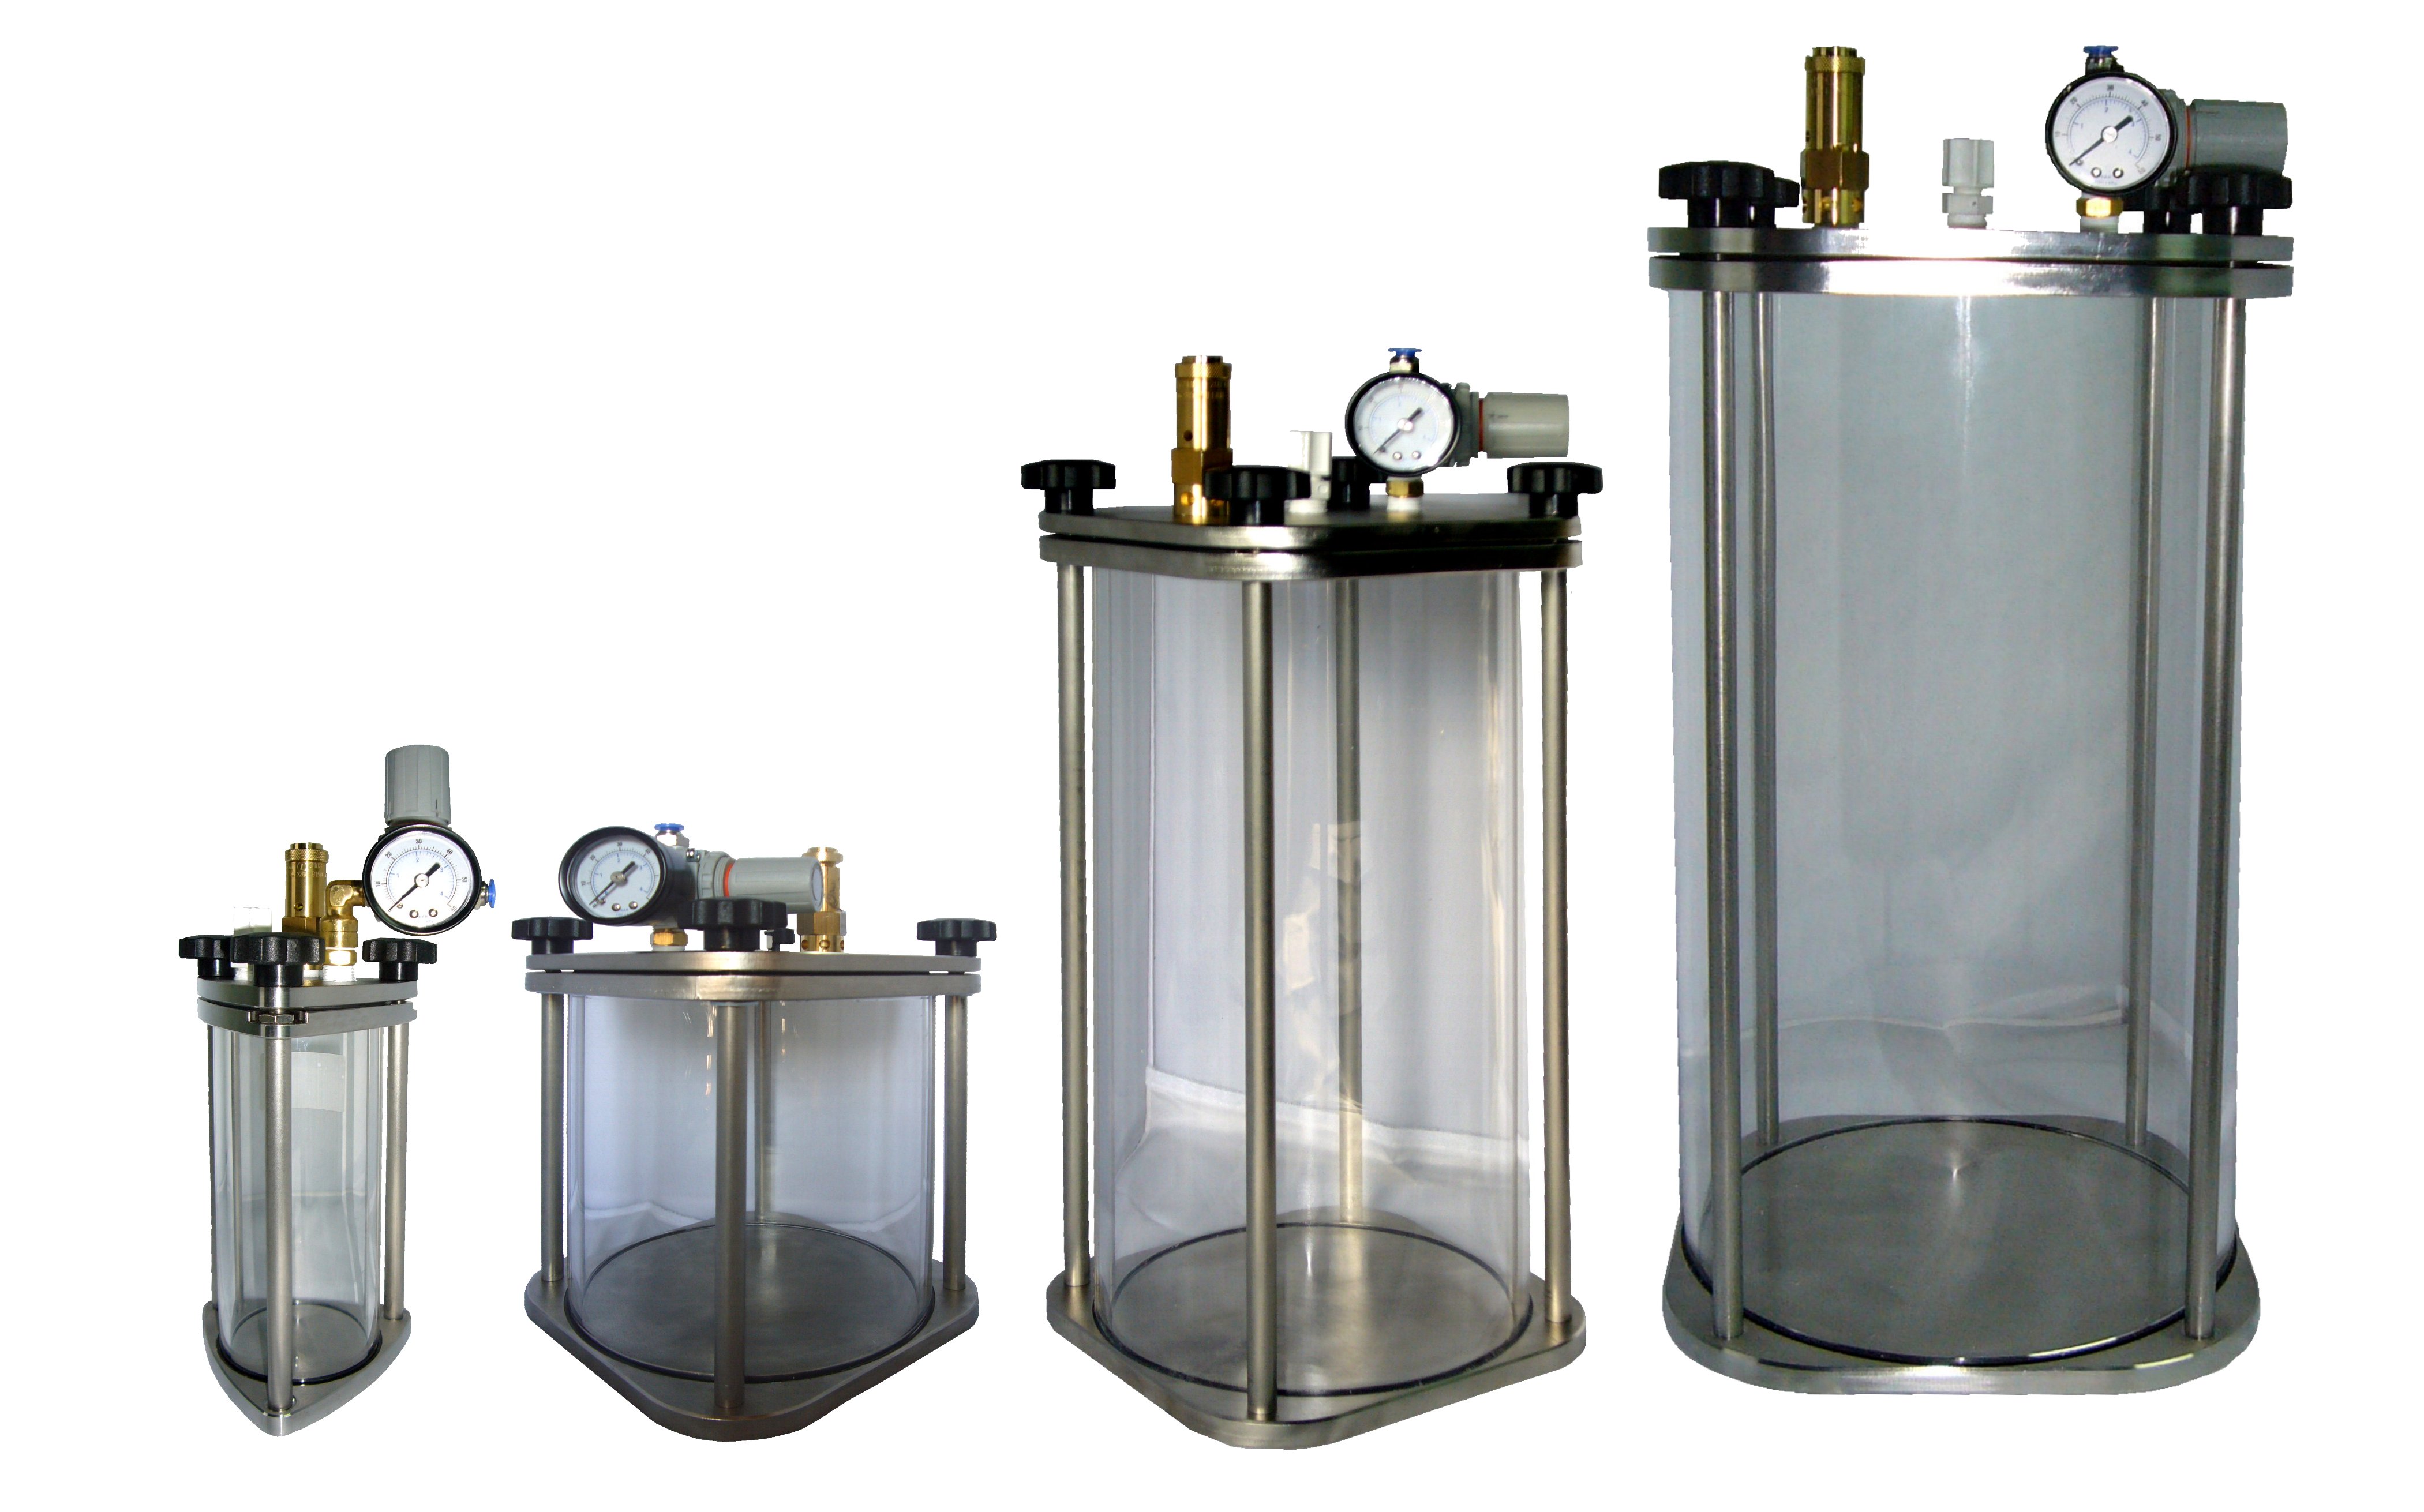 The pressure vessels from  Smart Reservoir Technology (SR-Tek) are being used to investigate the effects of different operating pressures on membrane filtration.